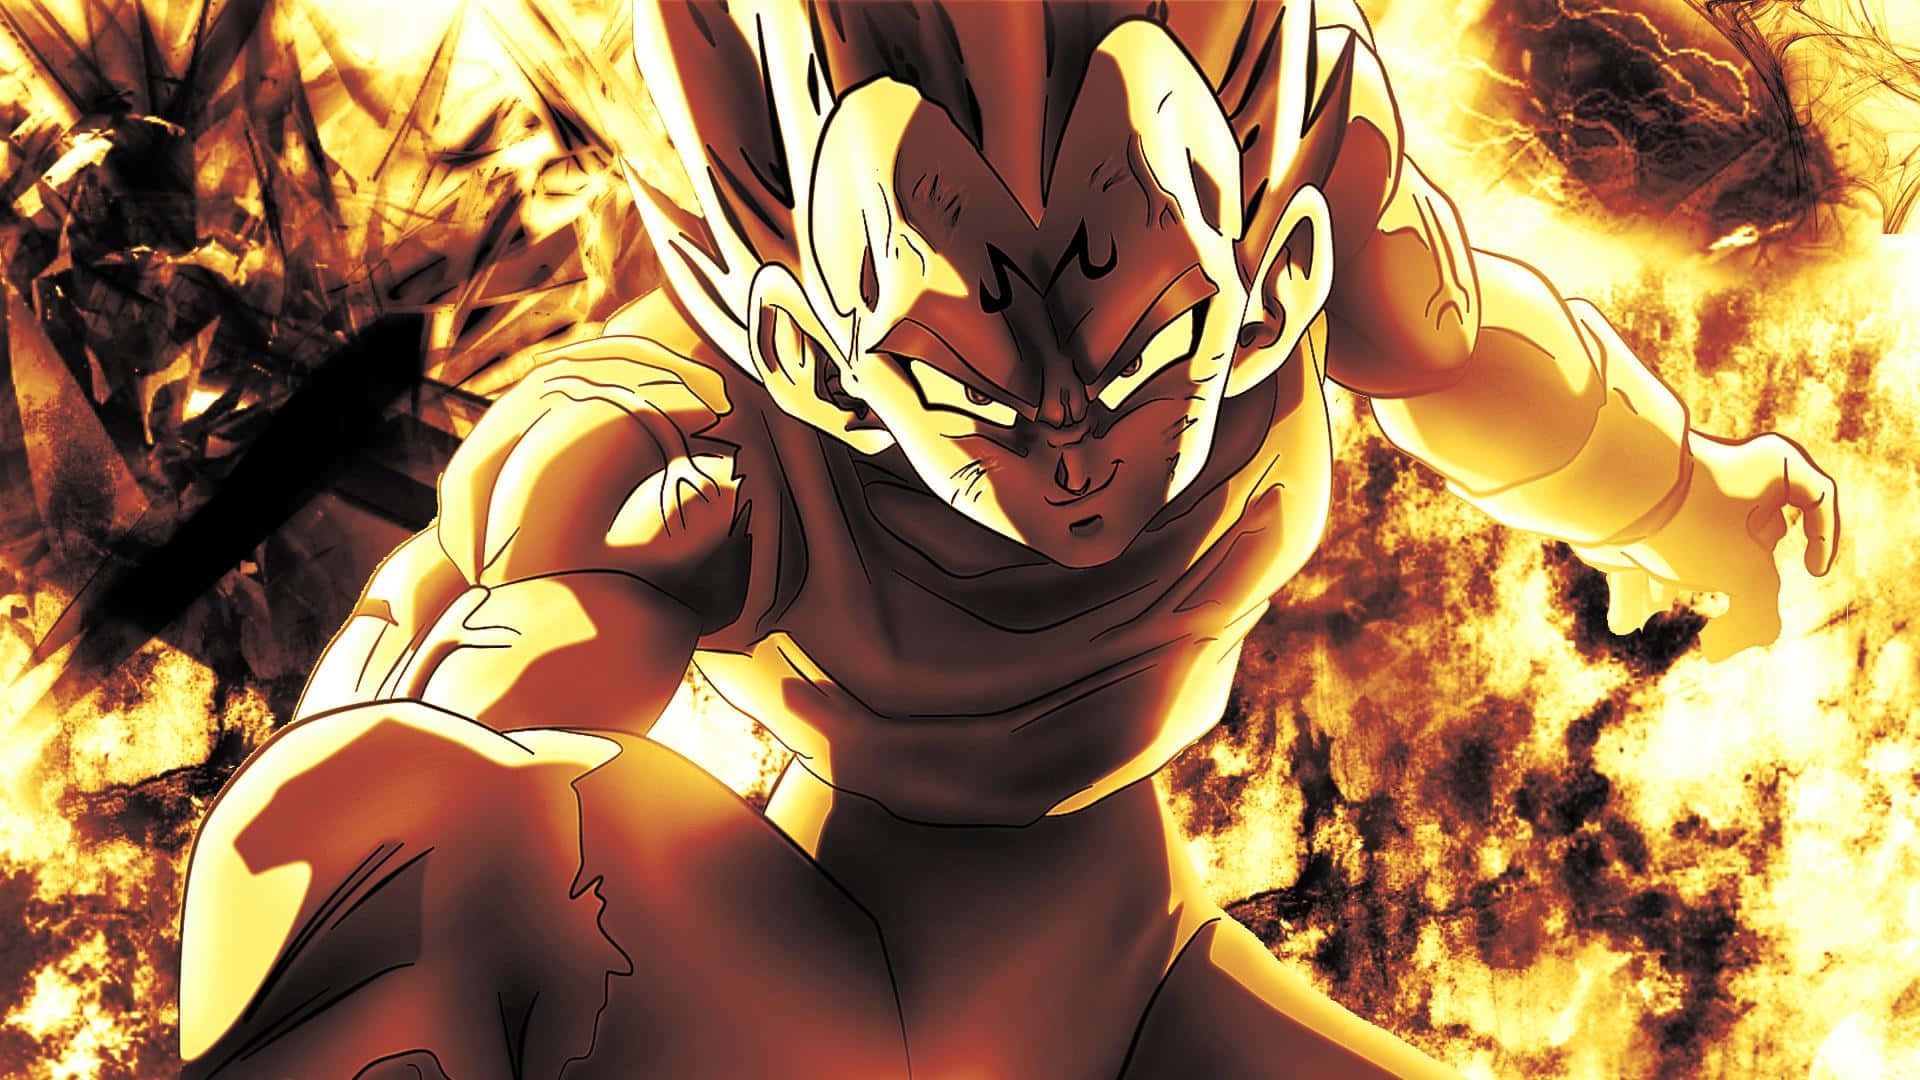 Powerful Vegeta ready for battle in a dynamic pose